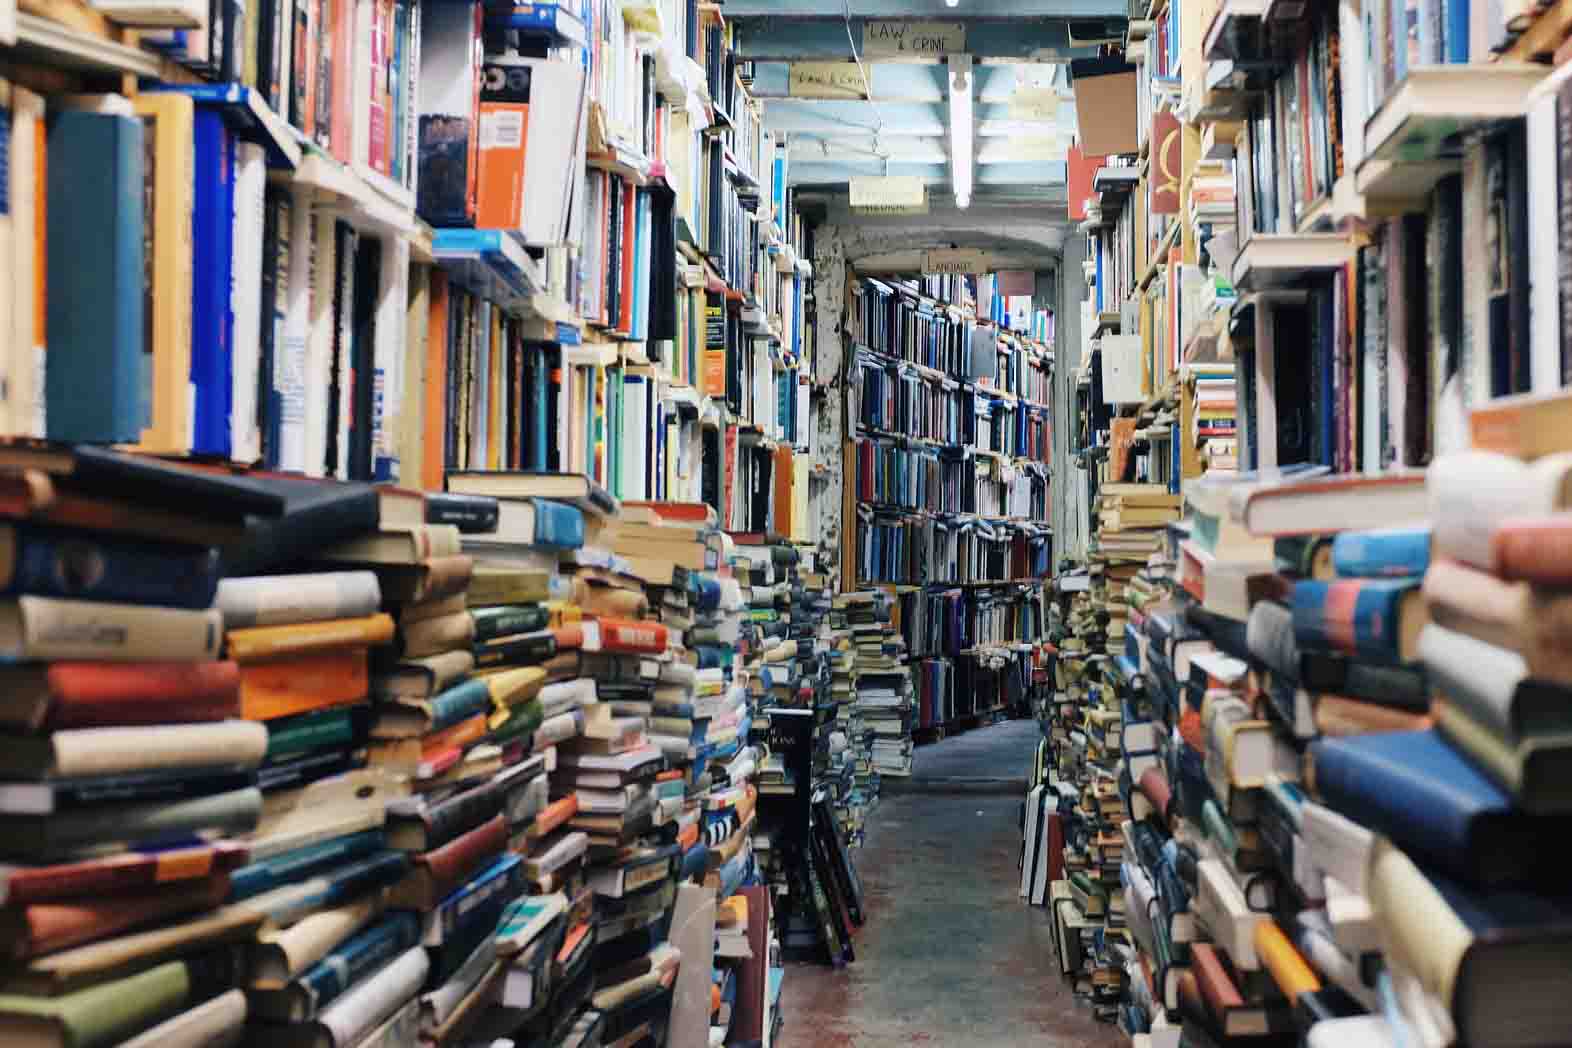 Books packed into library shelves